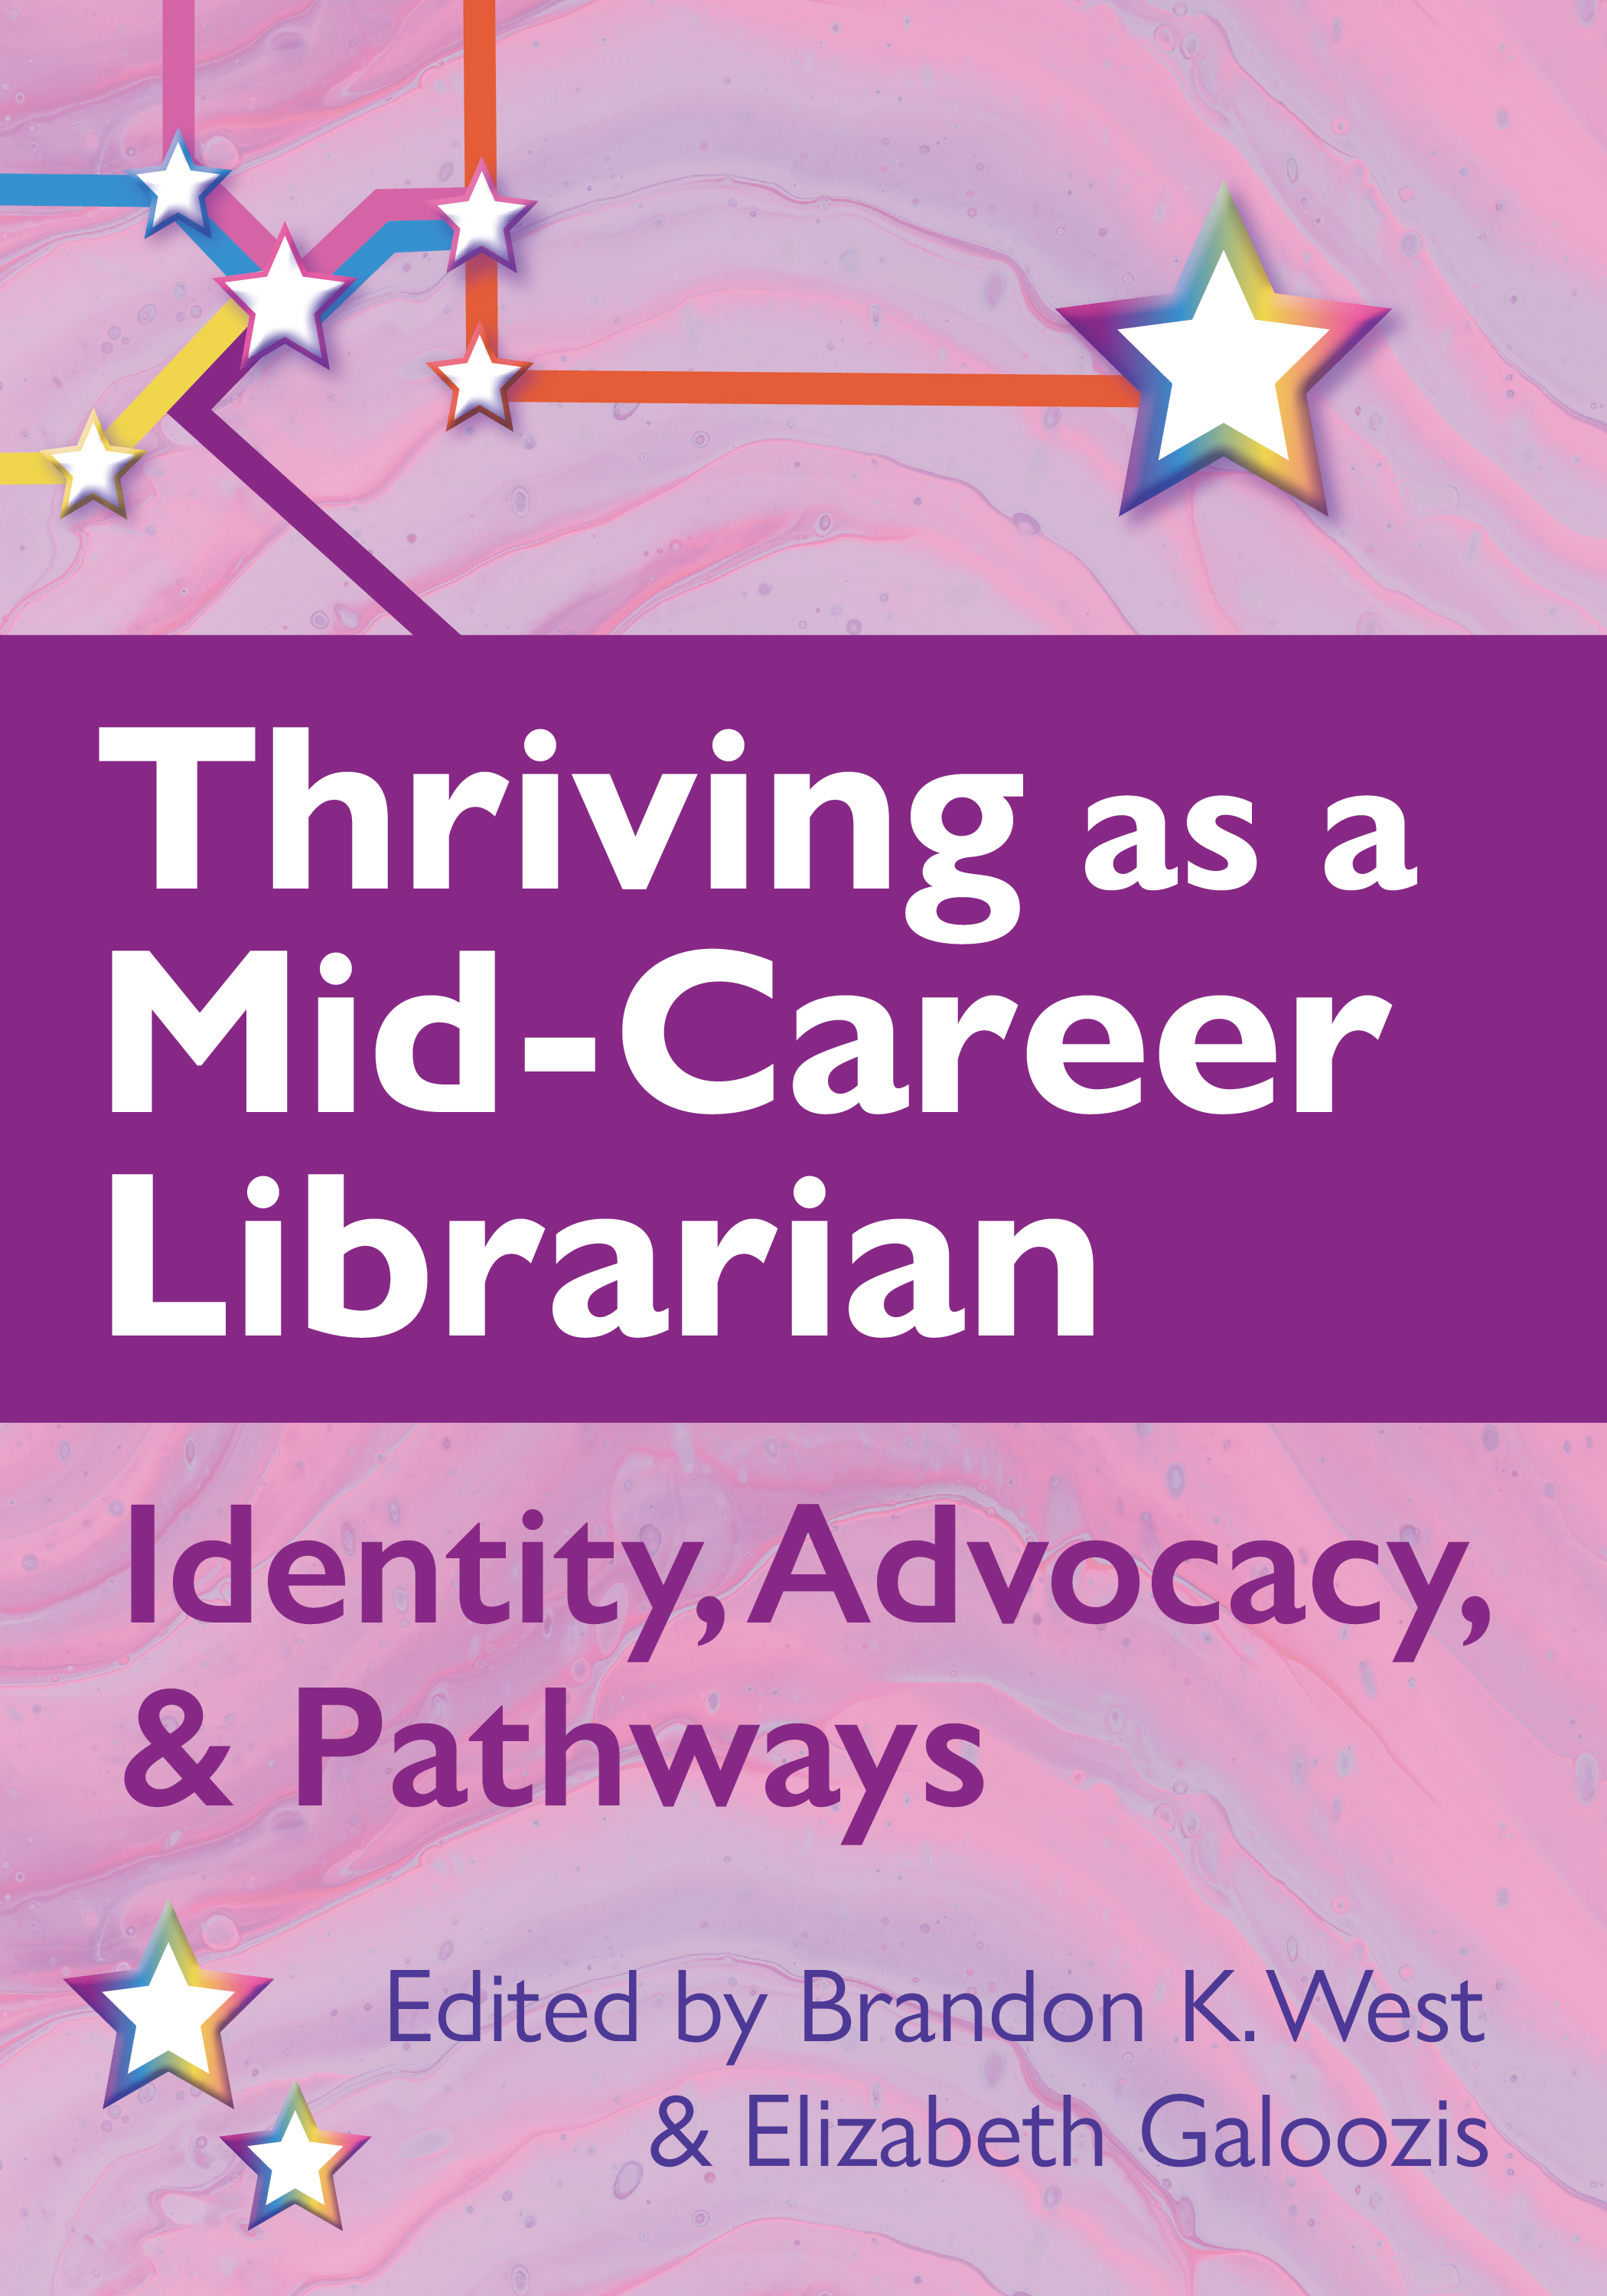 Thriving as a Mid-Career Librarian: